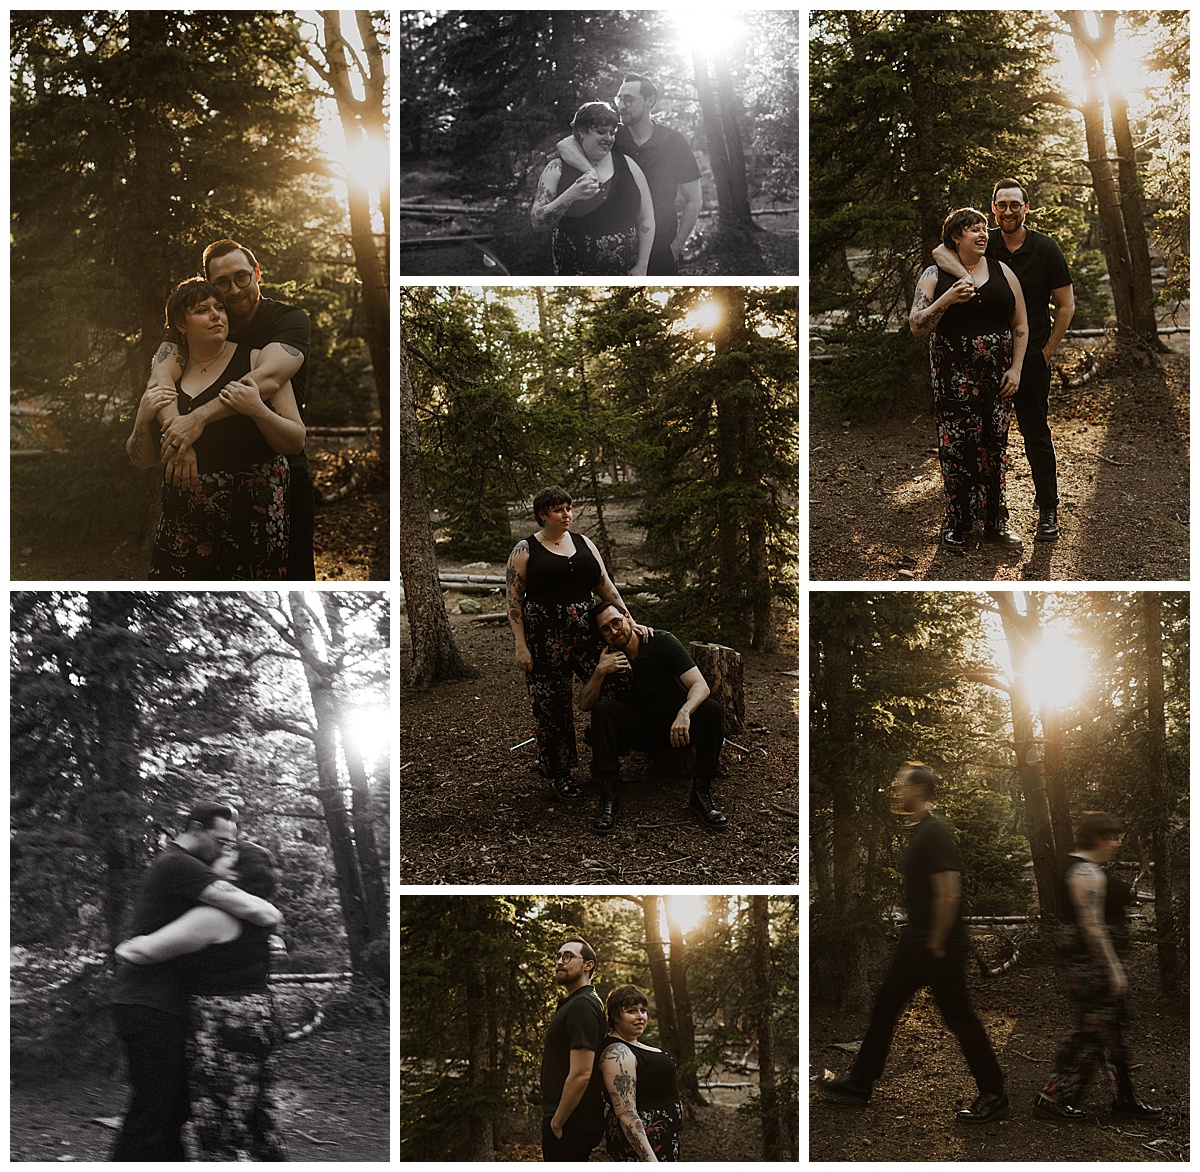 Photos of a couple together in the woods